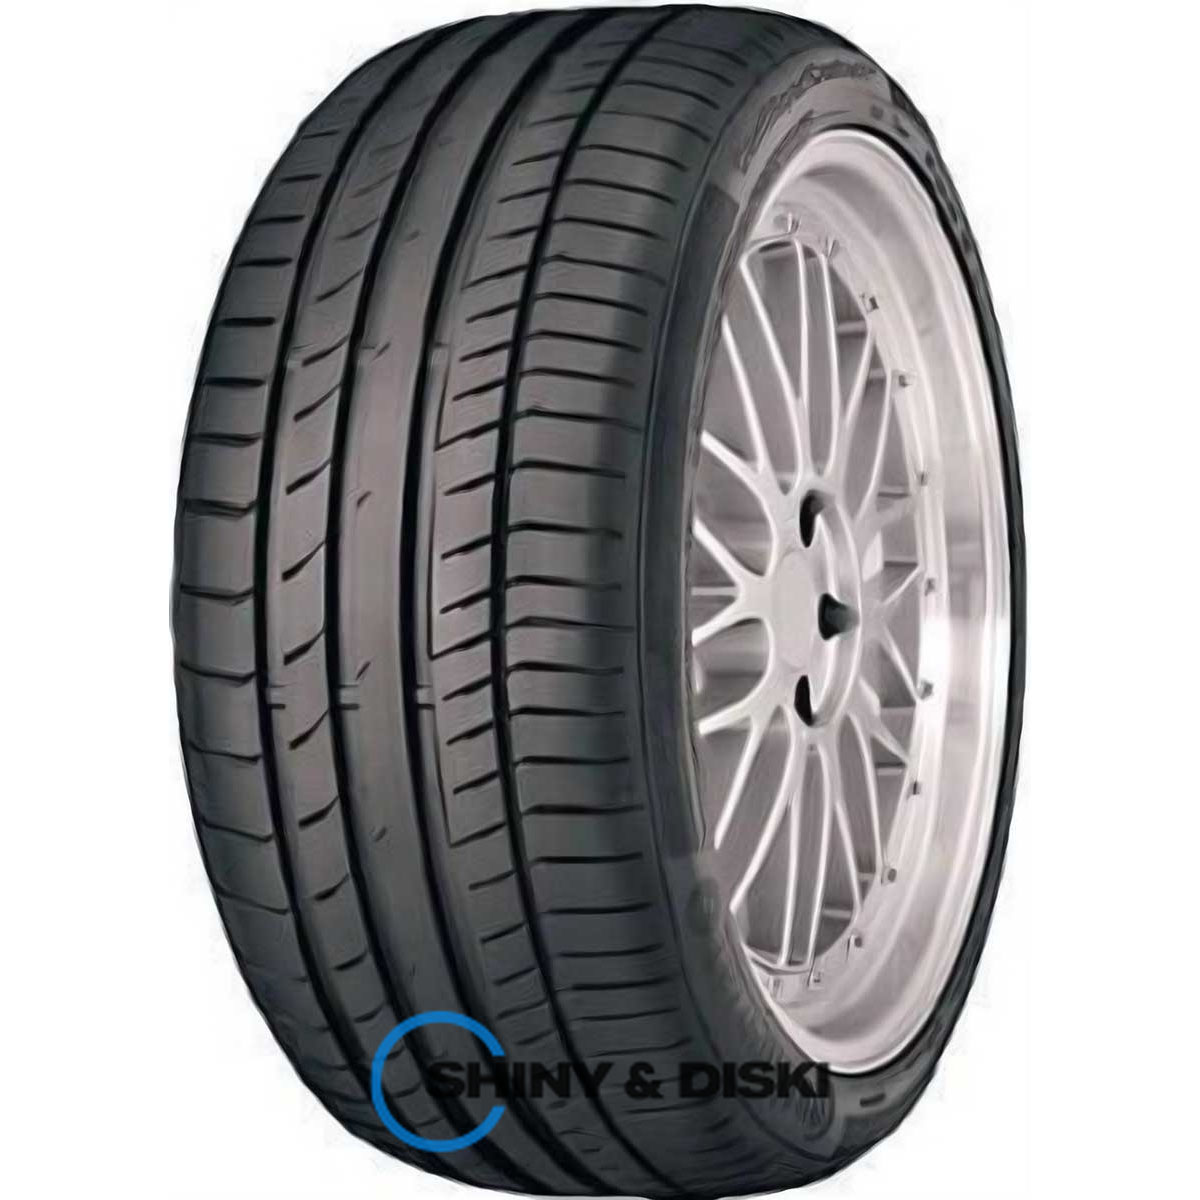 continental sportcontact 5p 265/30 r20 94y conti silent